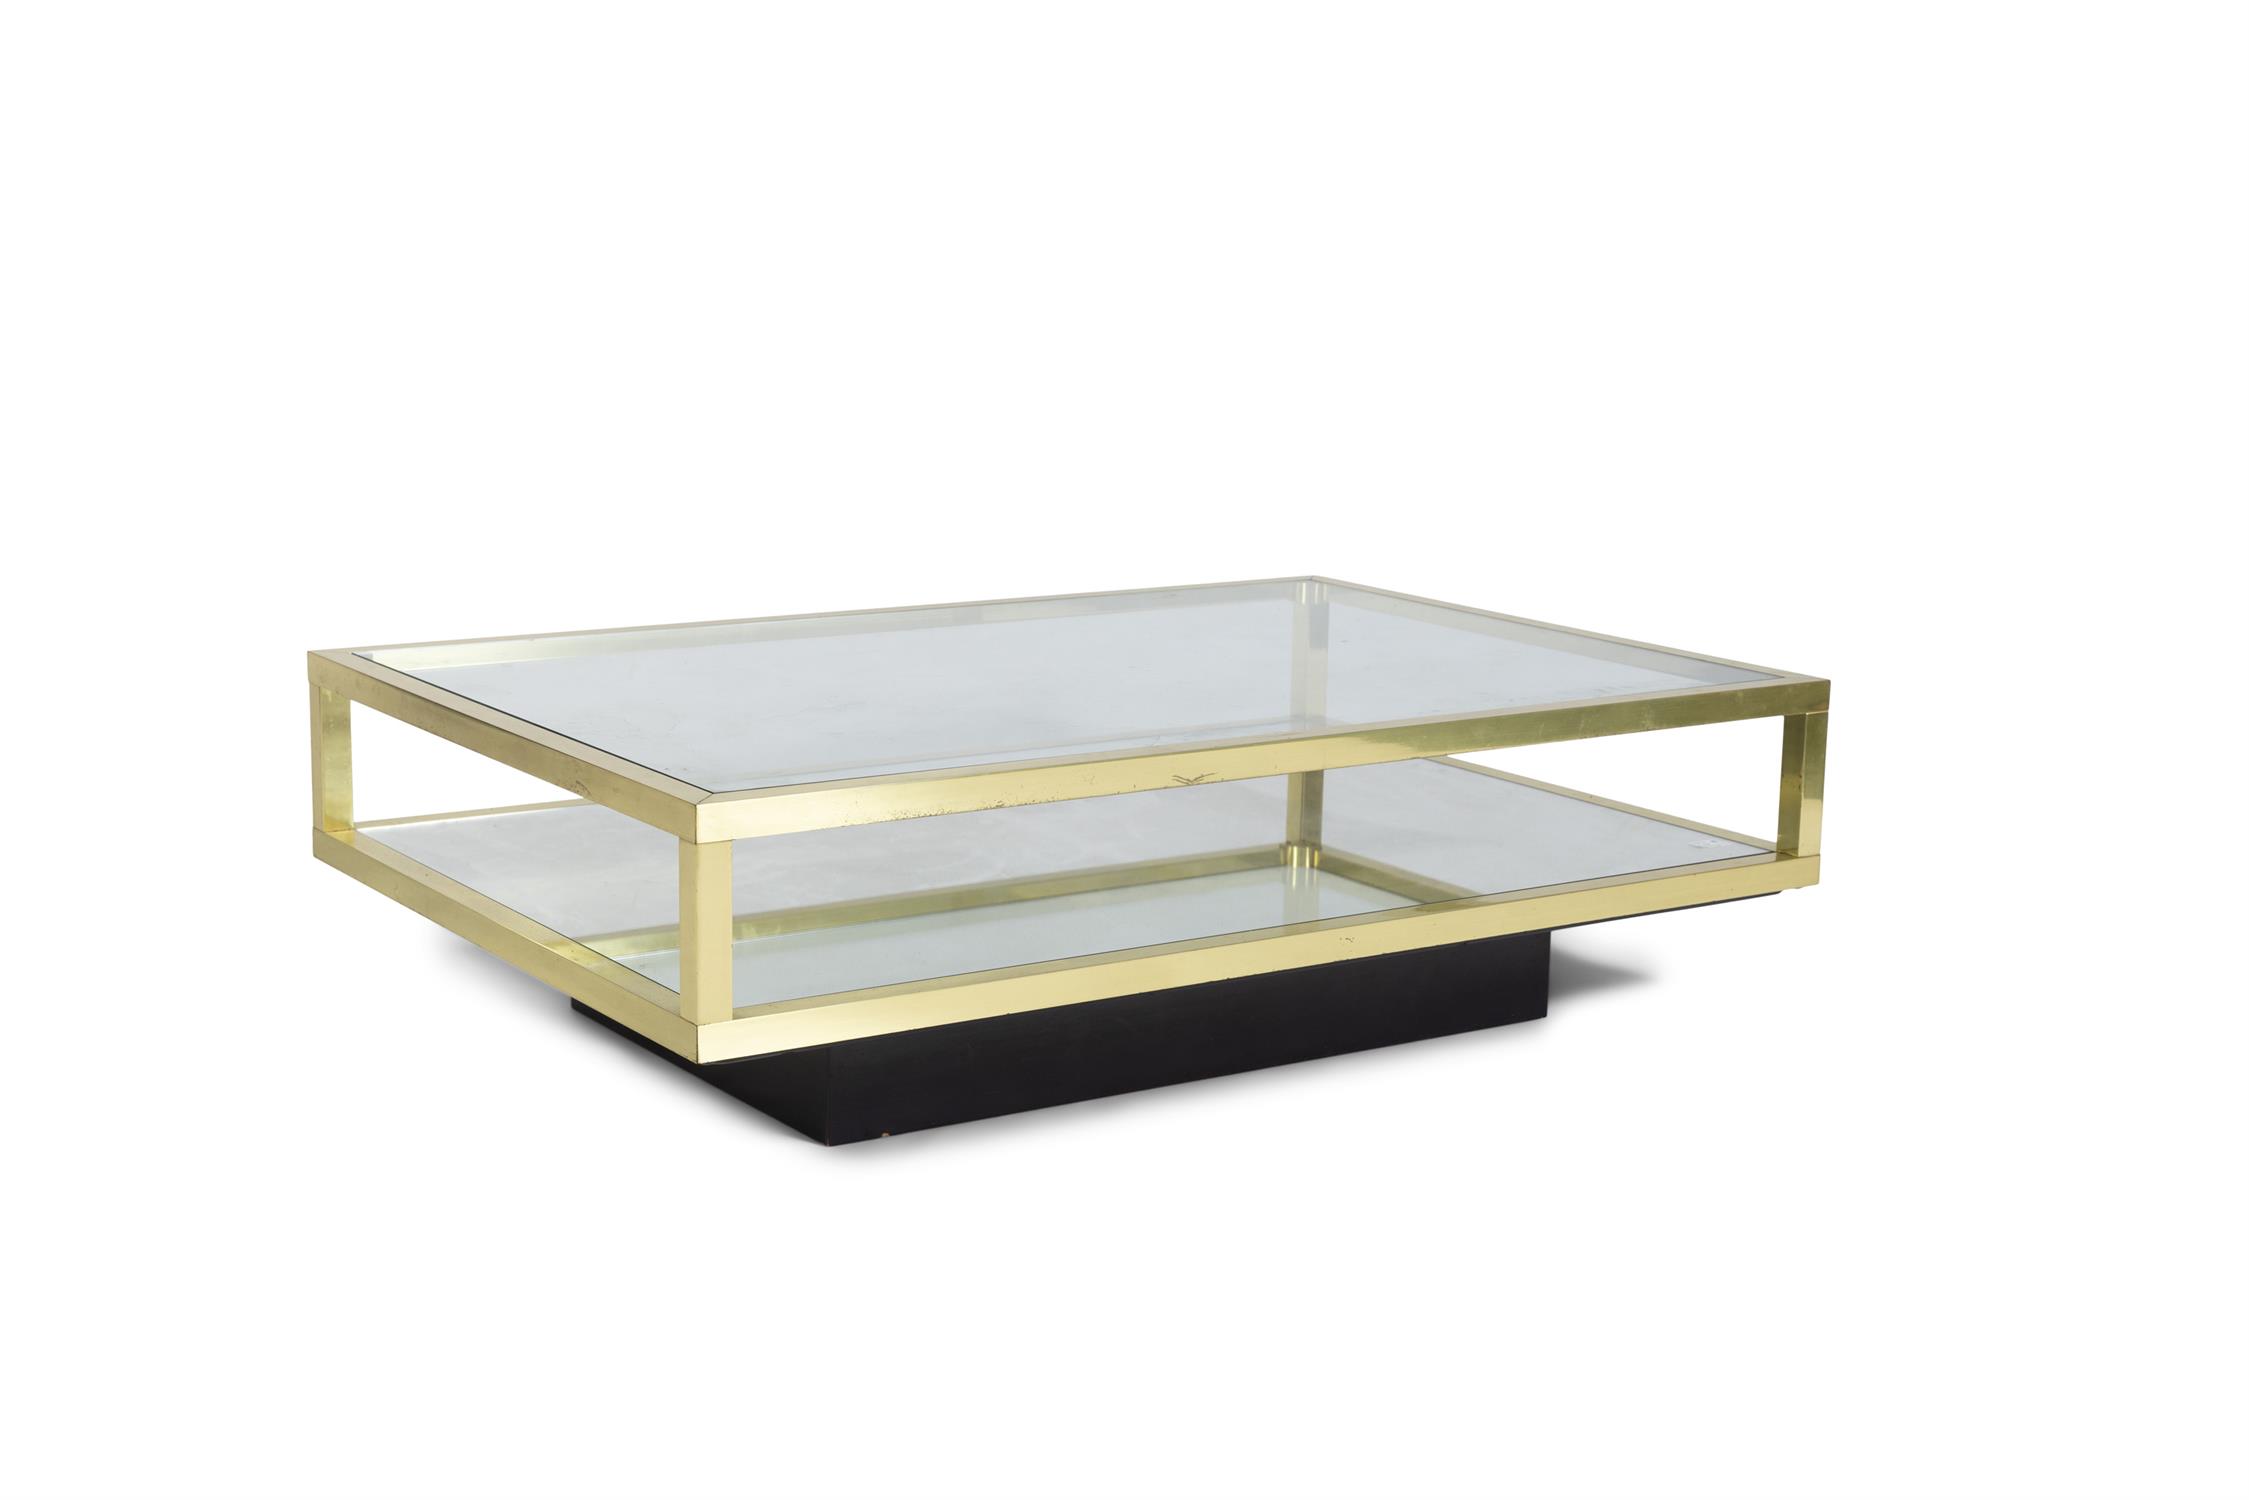 COFFEE TABLE A brass two tier coffee table with glass and mirror tops. Italy, c.1970. - Image 3 of 4